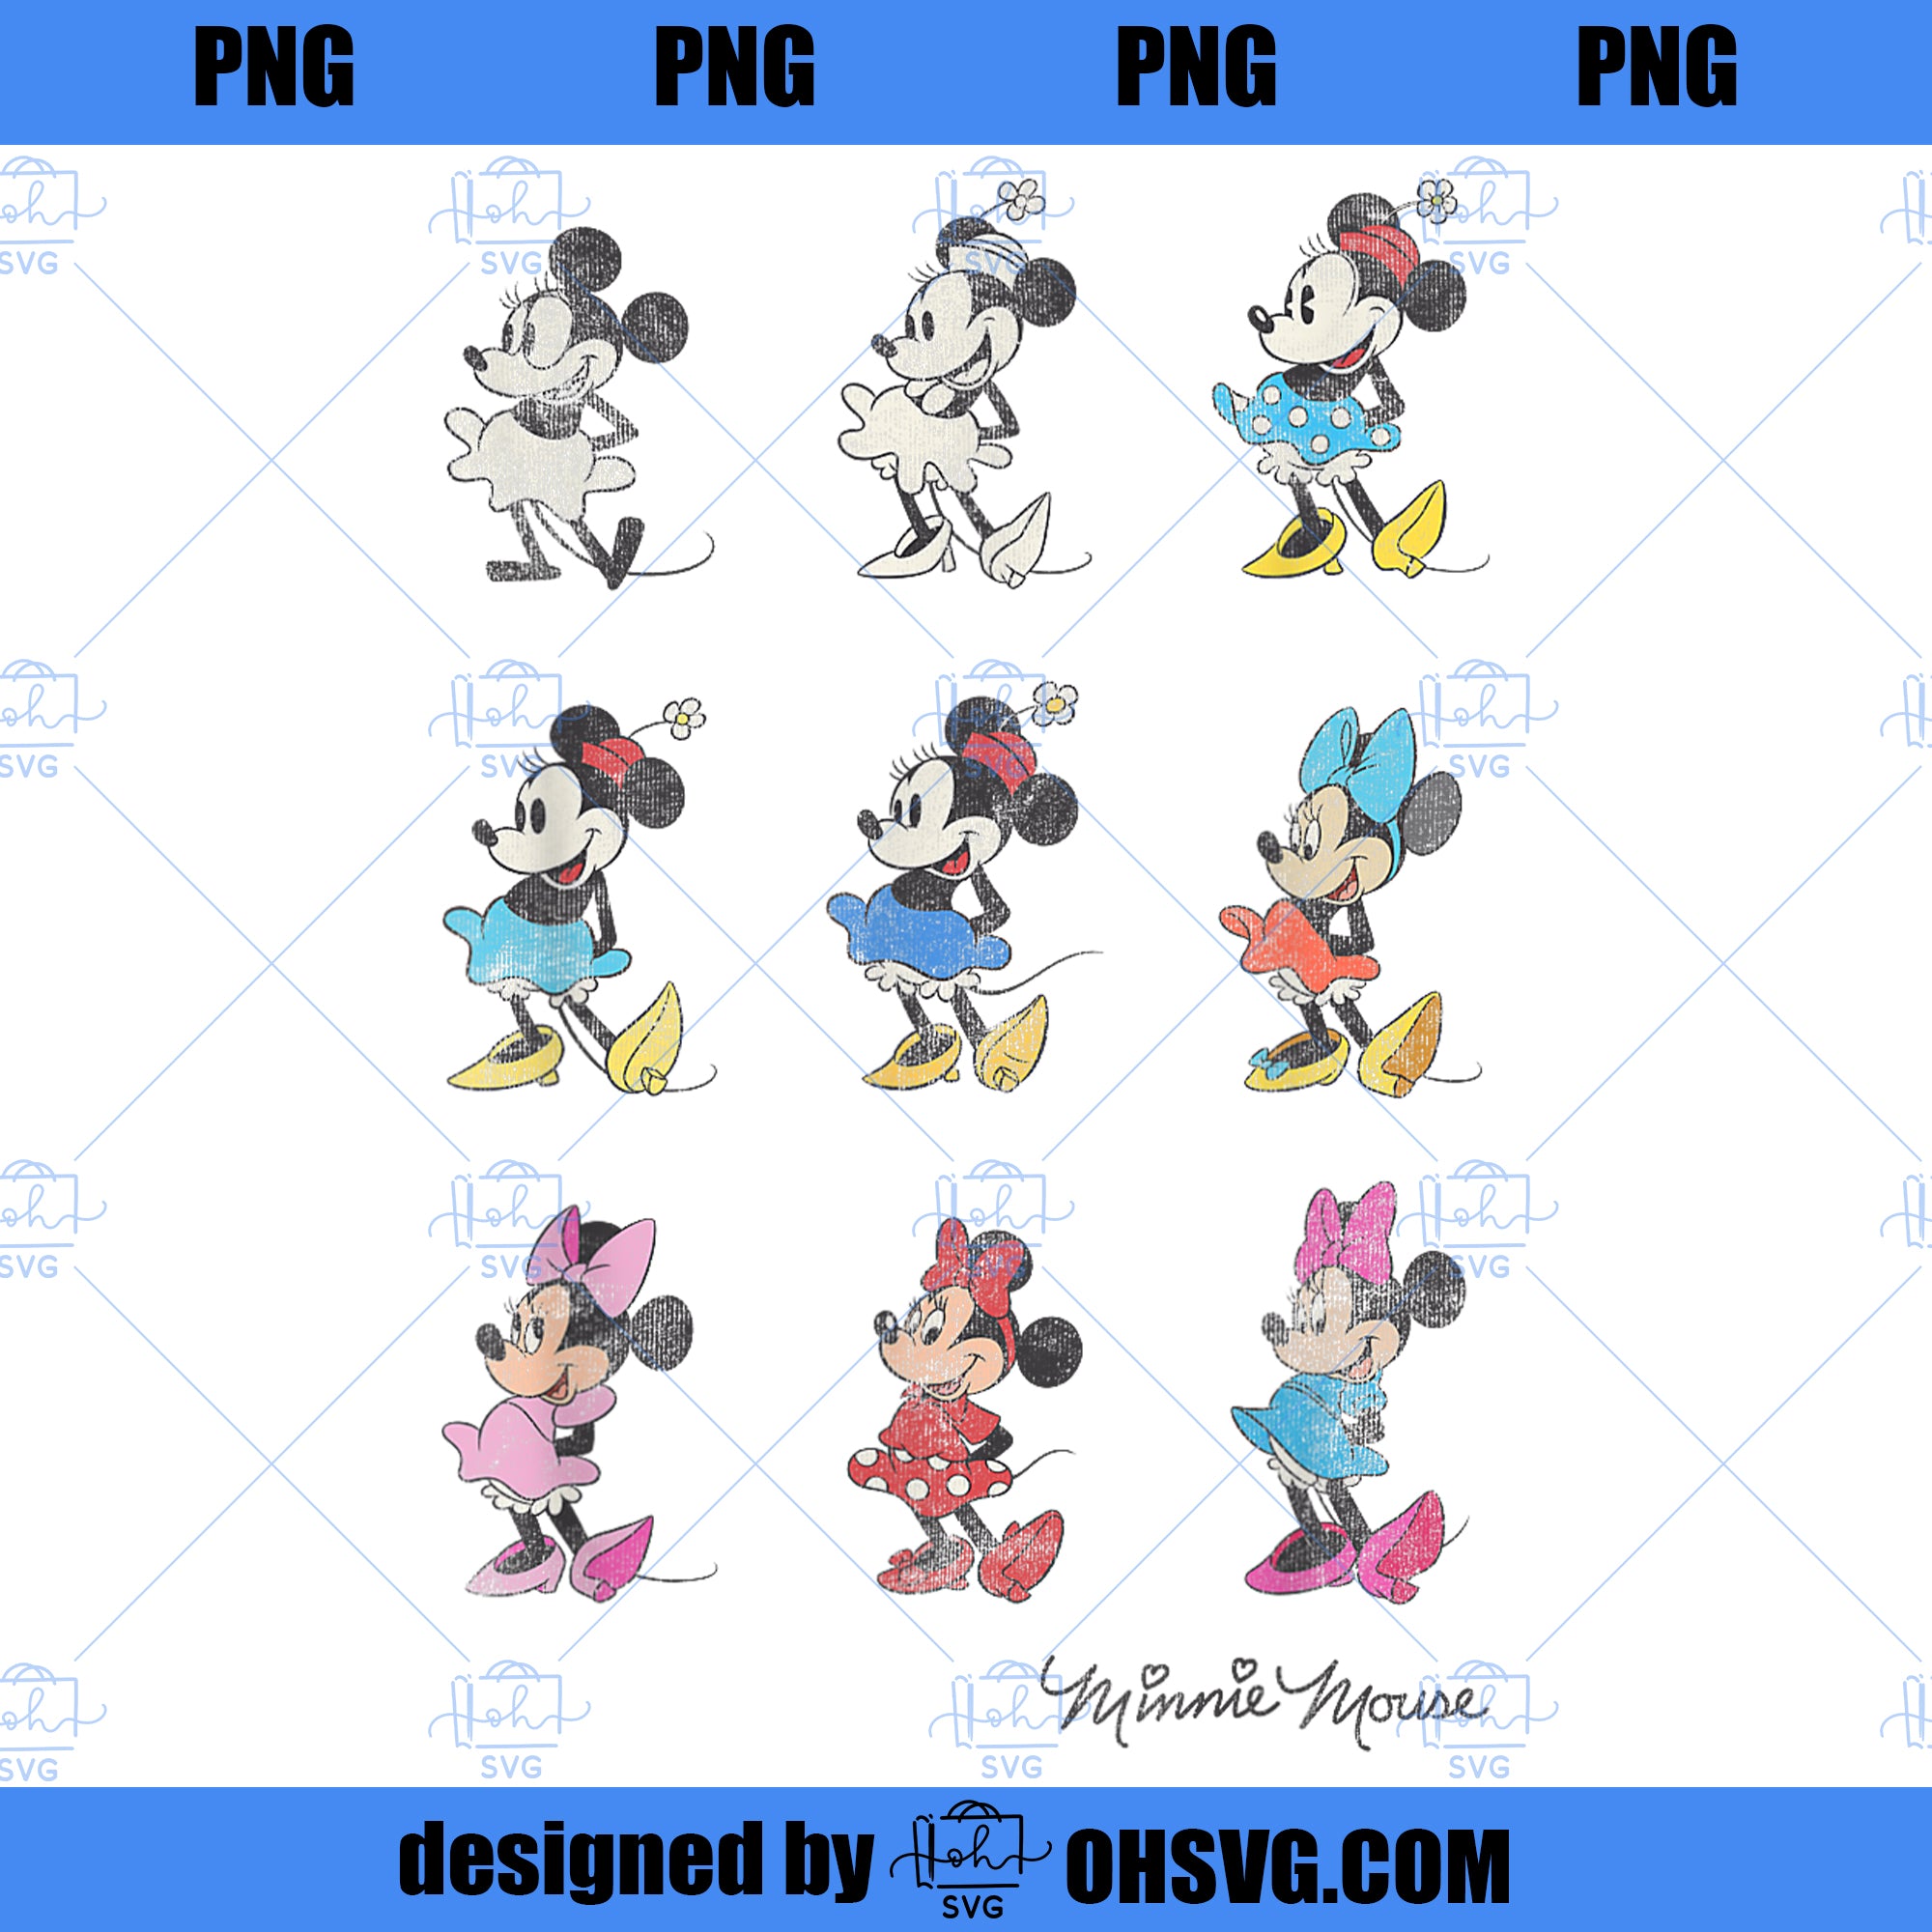 Disney Mickey And Friends Minnie Mouse Through The Years ,Small PNG, Disney PNG, Mickey Friends PNG